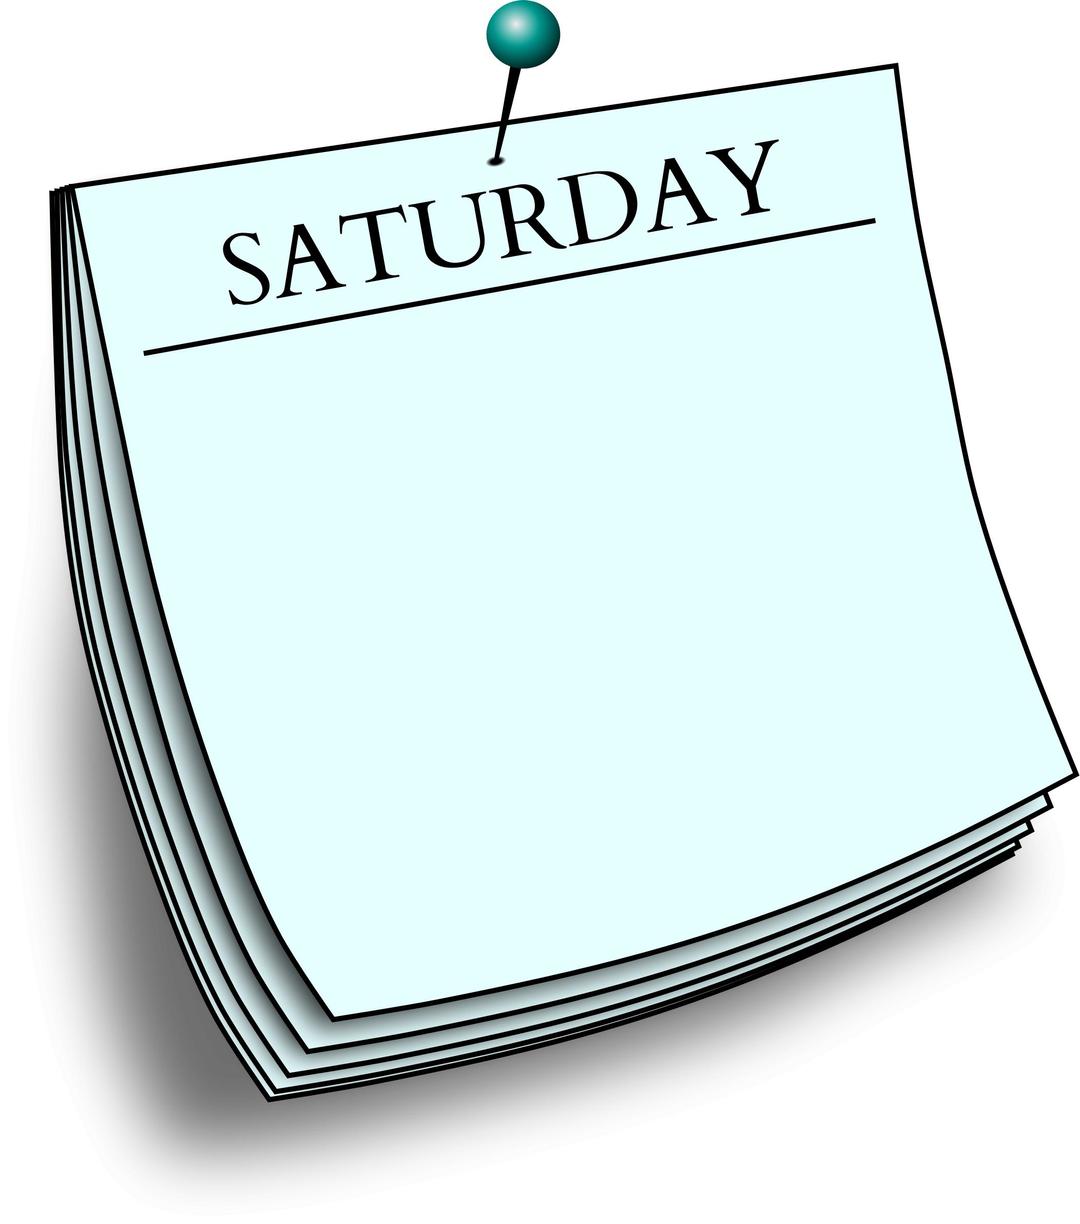 Daily note - Saturday png transparent